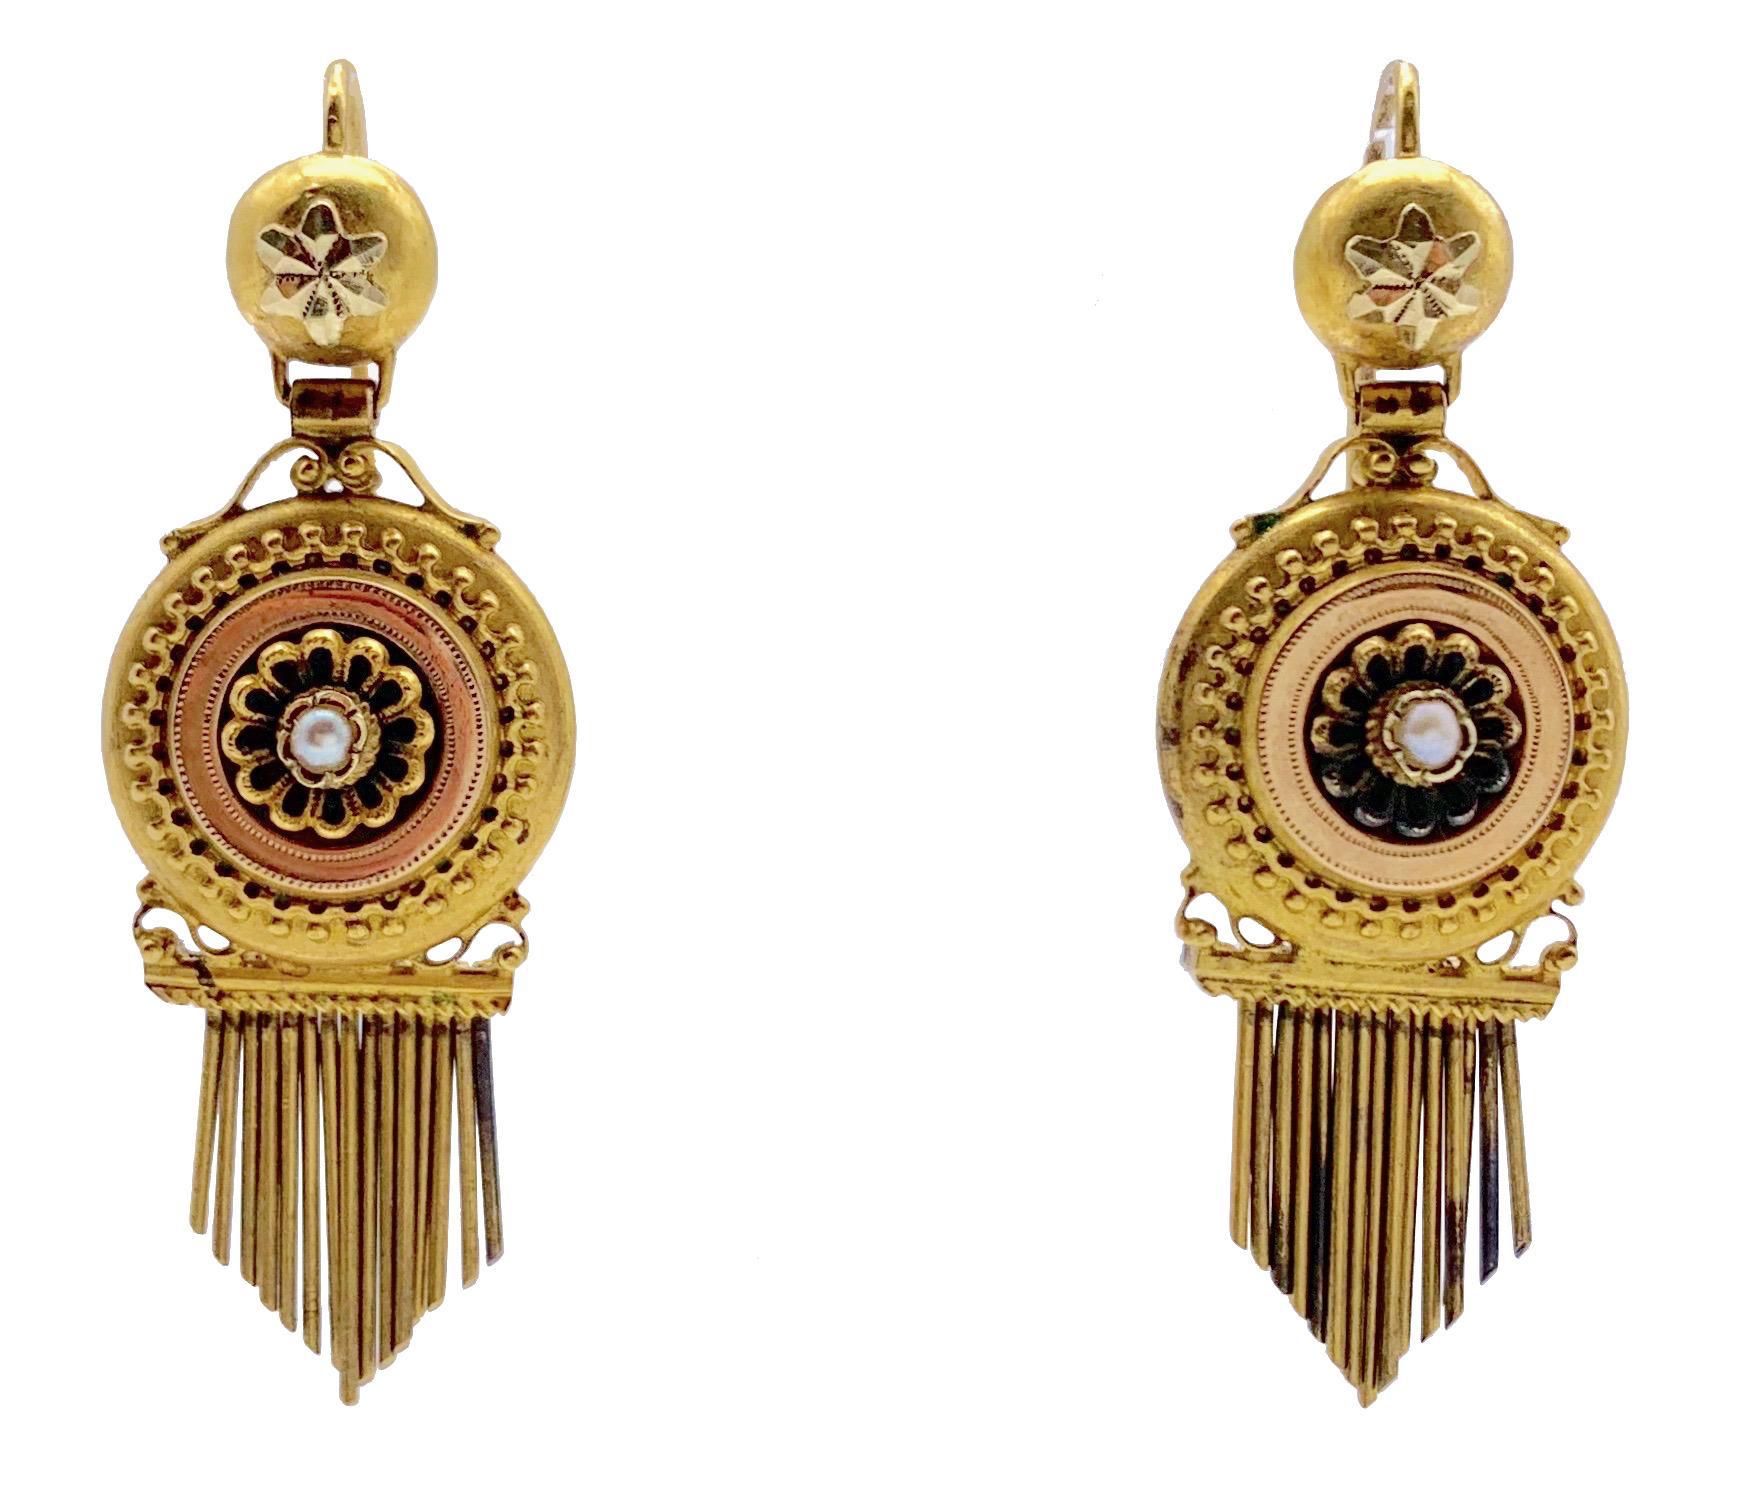 This elegant pair of earrings is timeless and can be worn with ease. The dangling, articulated delicate rods have particular charm.
The earrings are in their original condition and will benefit from a professional cleaning before they start their